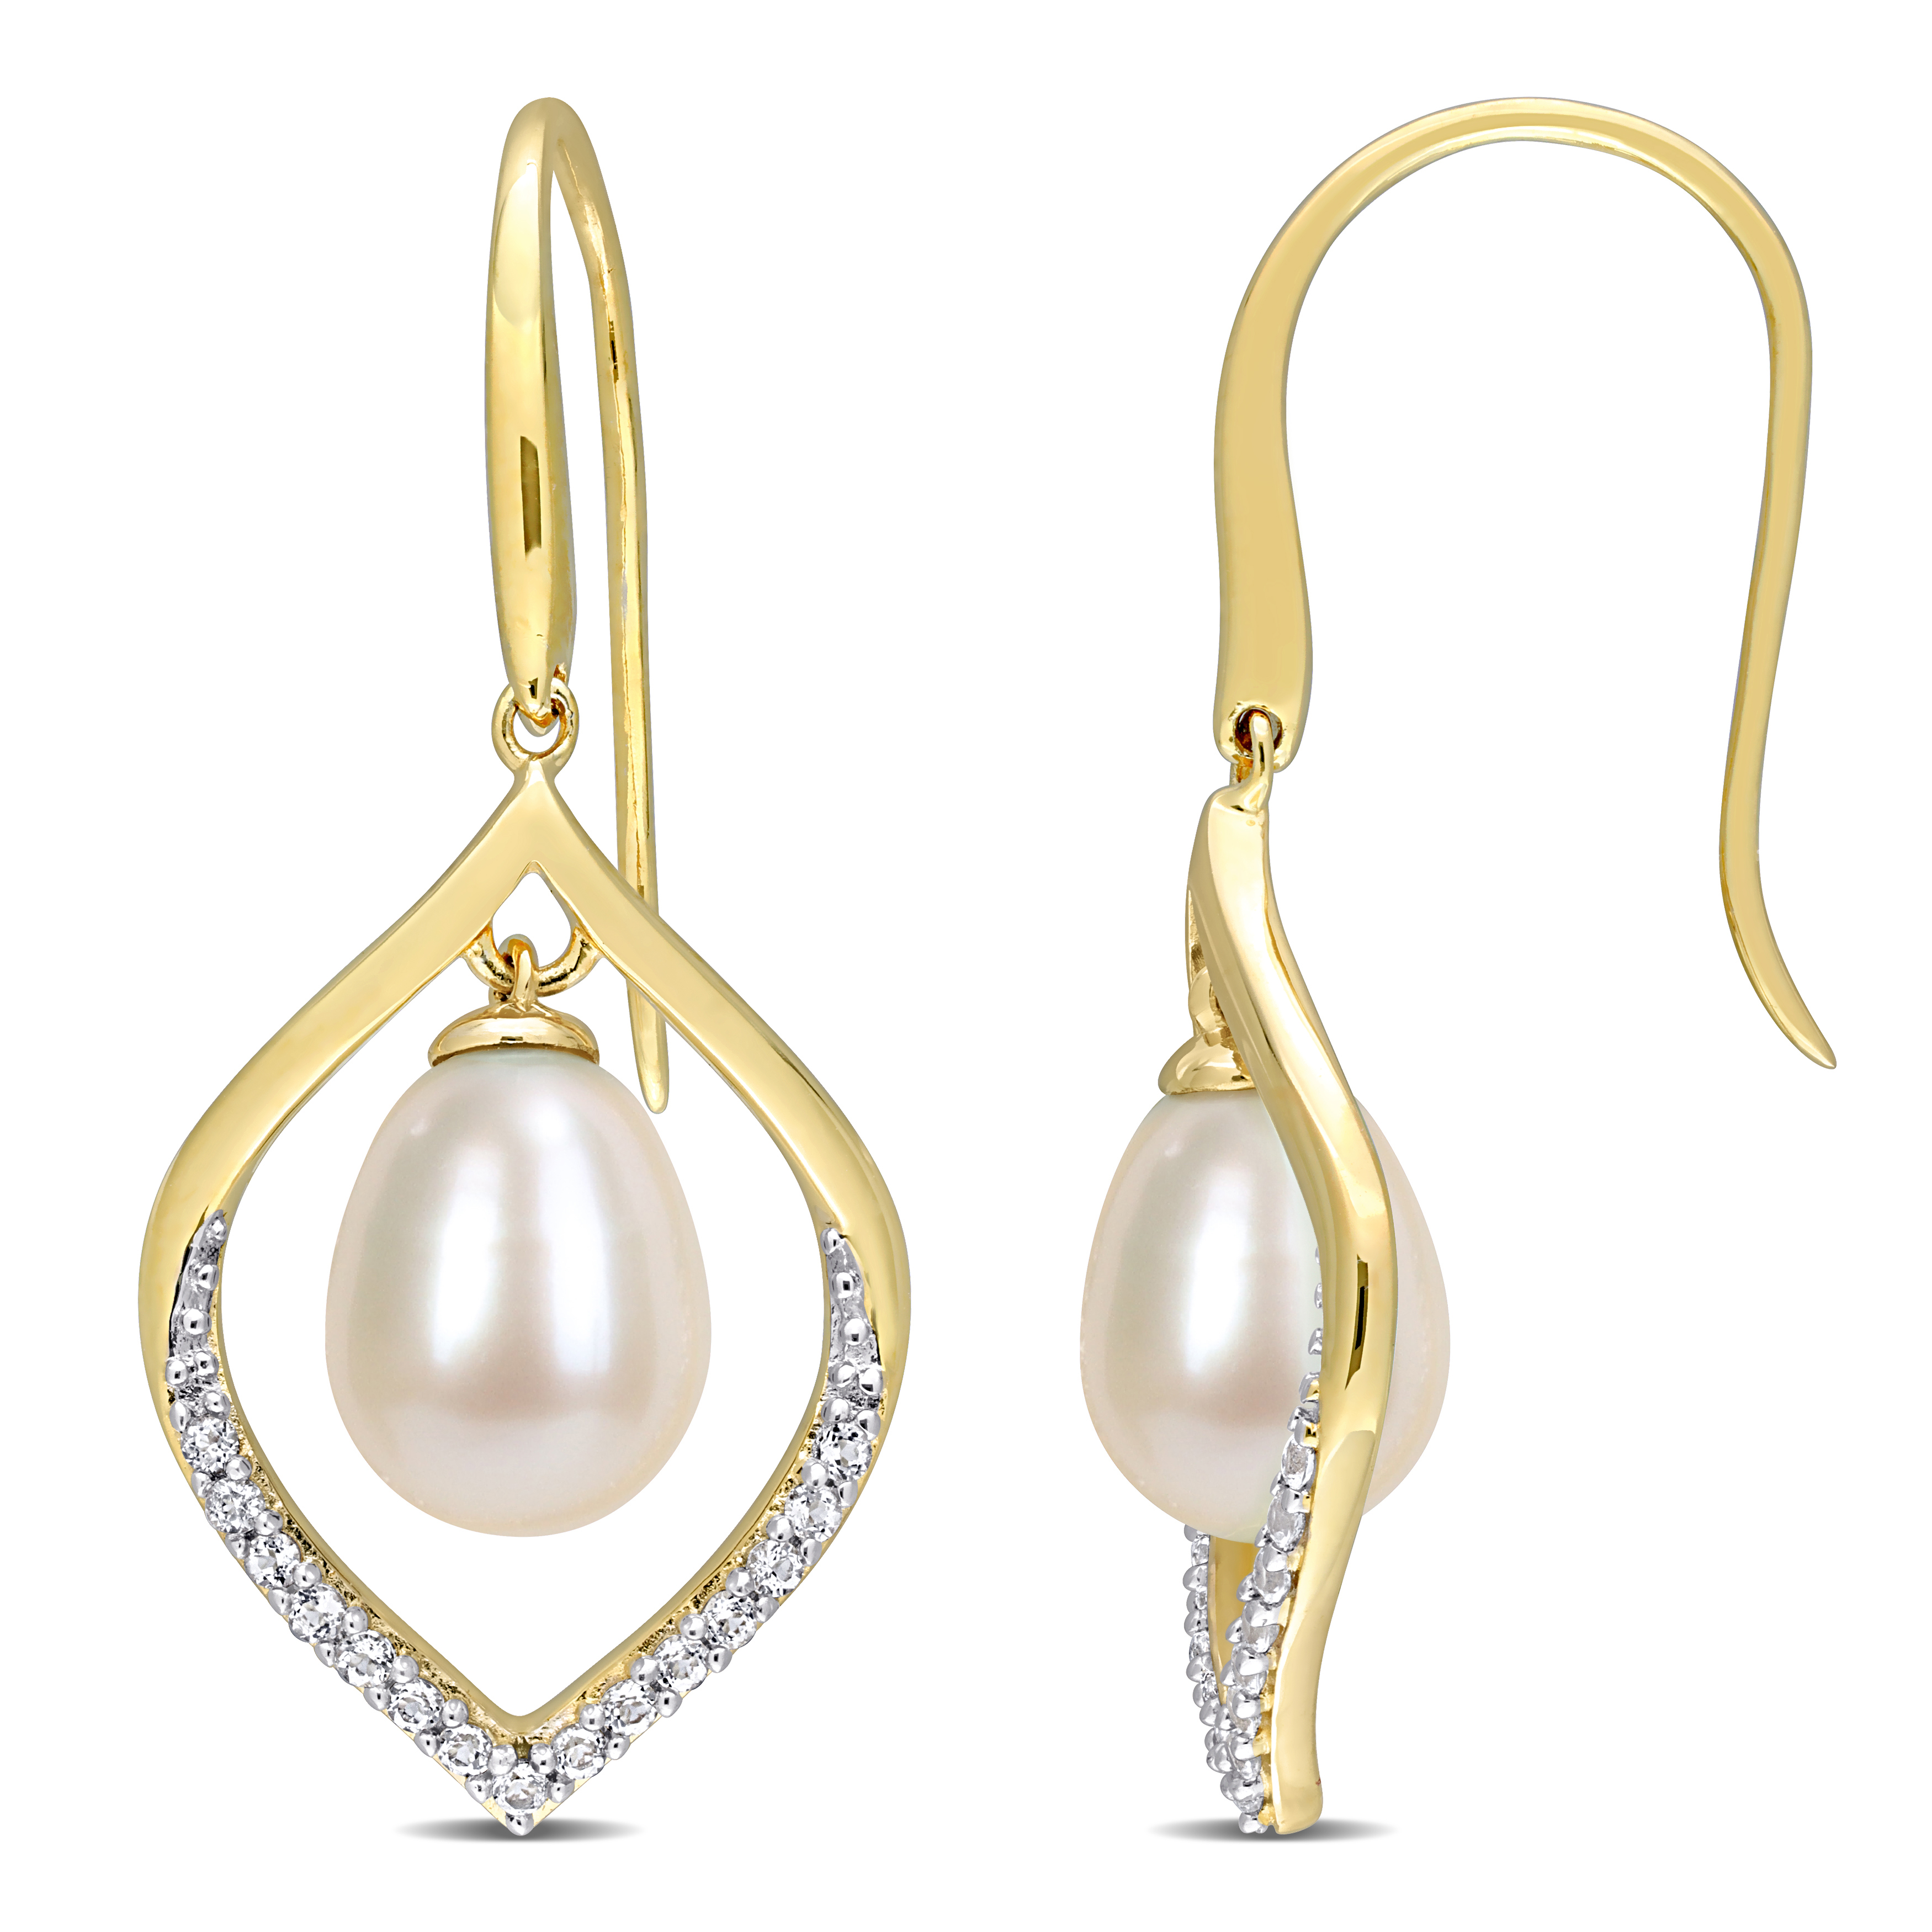 8-8.5 MM Freshwater Cultured Pearl and 1/3 CT TGW White Topaz Open Hook Earrings in Yellow Plated Sterling Silver